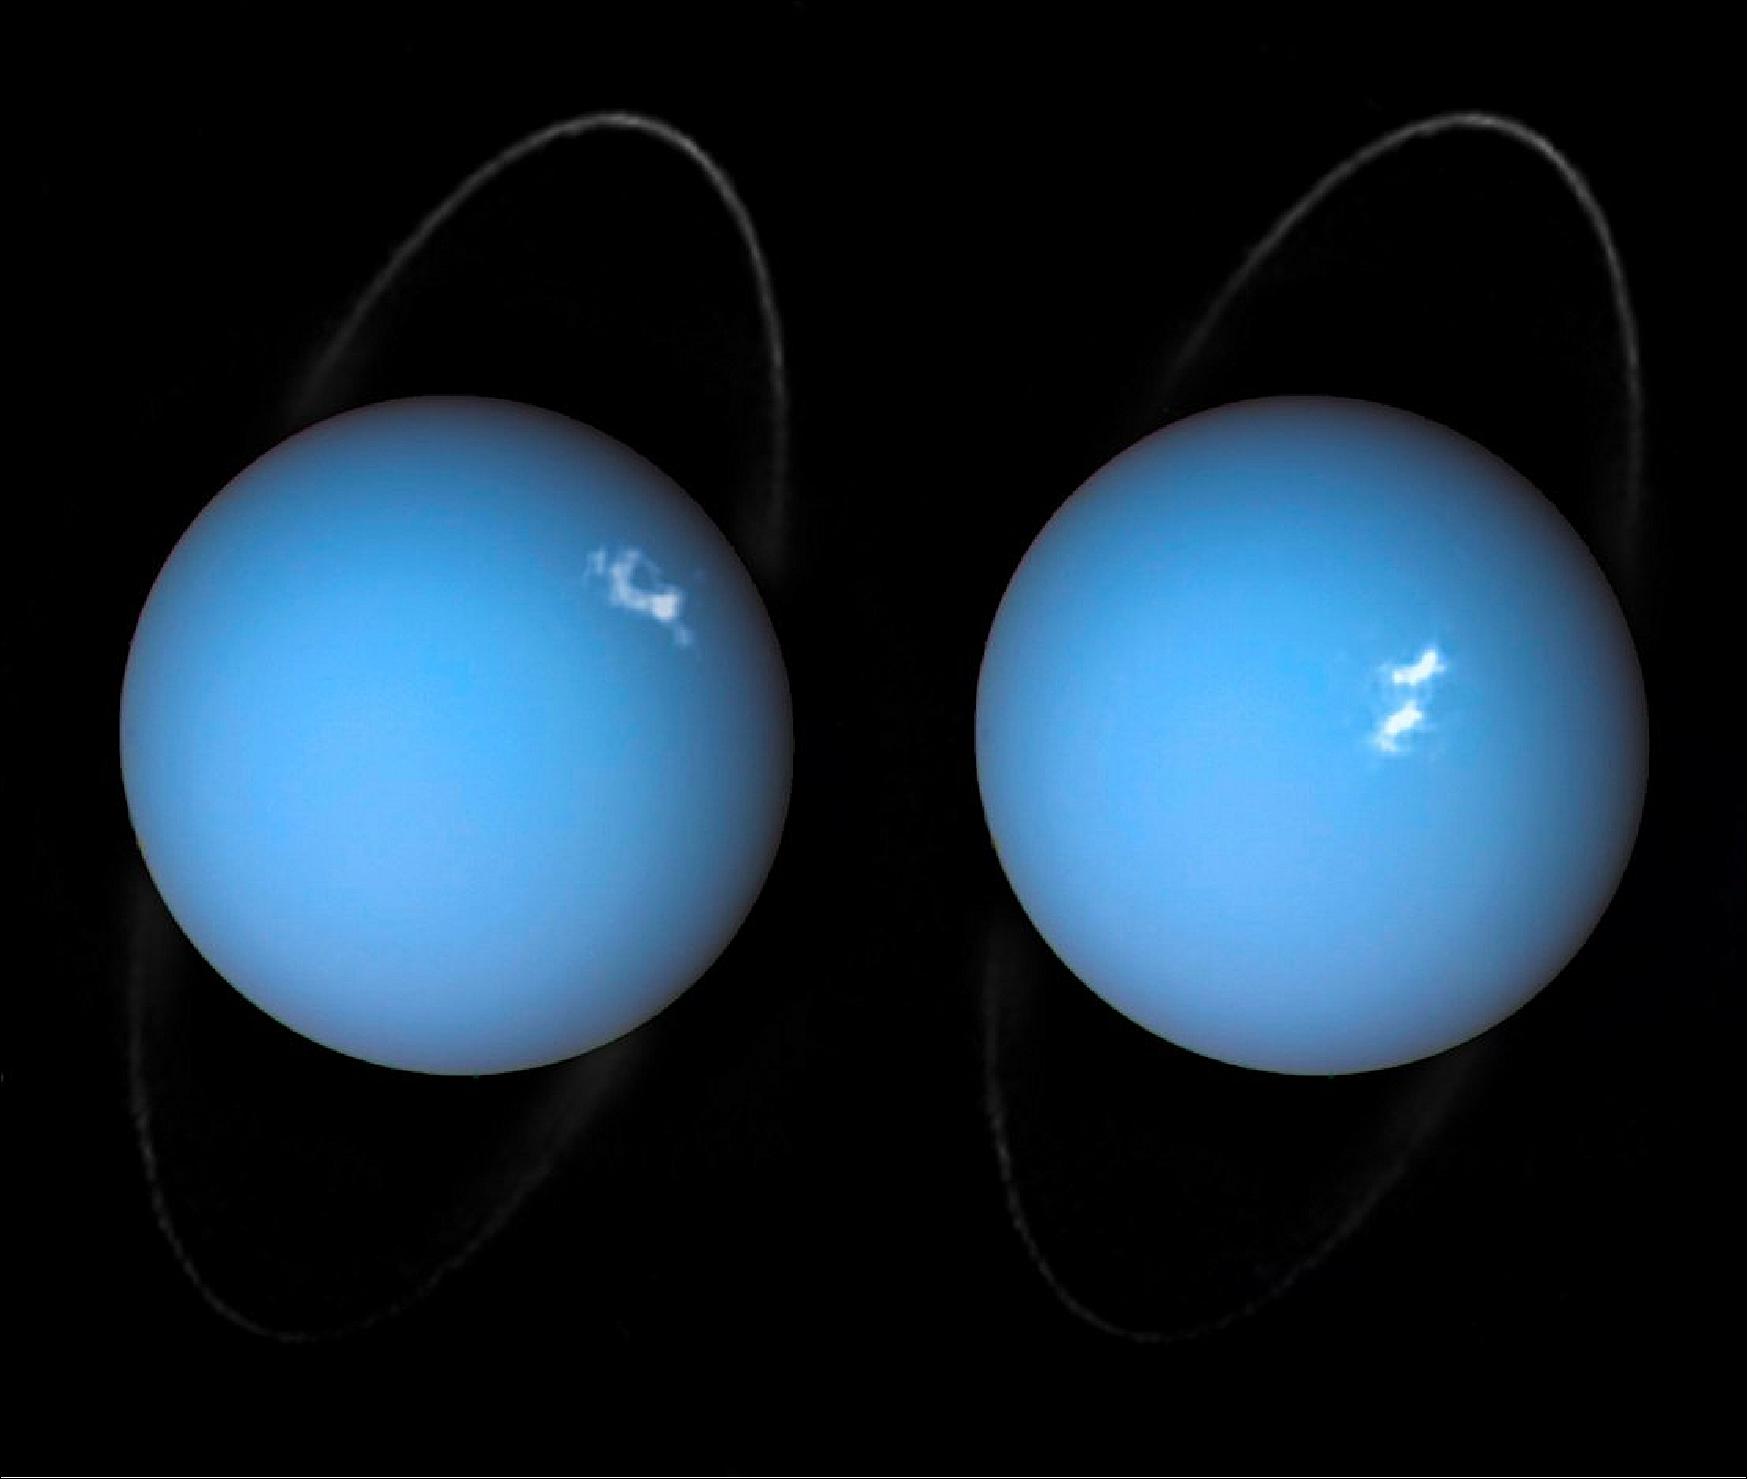 Figure 10: This image, originally published in 2017, shows the auroras as wispy patches of white against the planet’s azure blue disc, and combines optical and ultraviolet observations from Hubble with archive data from NASA’s Voyager 2 probe. Voyager 2 was the first and only craft to visit the outermost planets in the Solar System; it flew past Uranus in January 1986, and past Neptune in August 1989. These icy planets have not been visited since. NASA and ESA have been studying a possible joint mission that would target the two ice giant planets in order to explore their intriguing role in our planetary system (image credit: ESA/Hubble & NASA, L. Lamy / Observatoire de Paris)